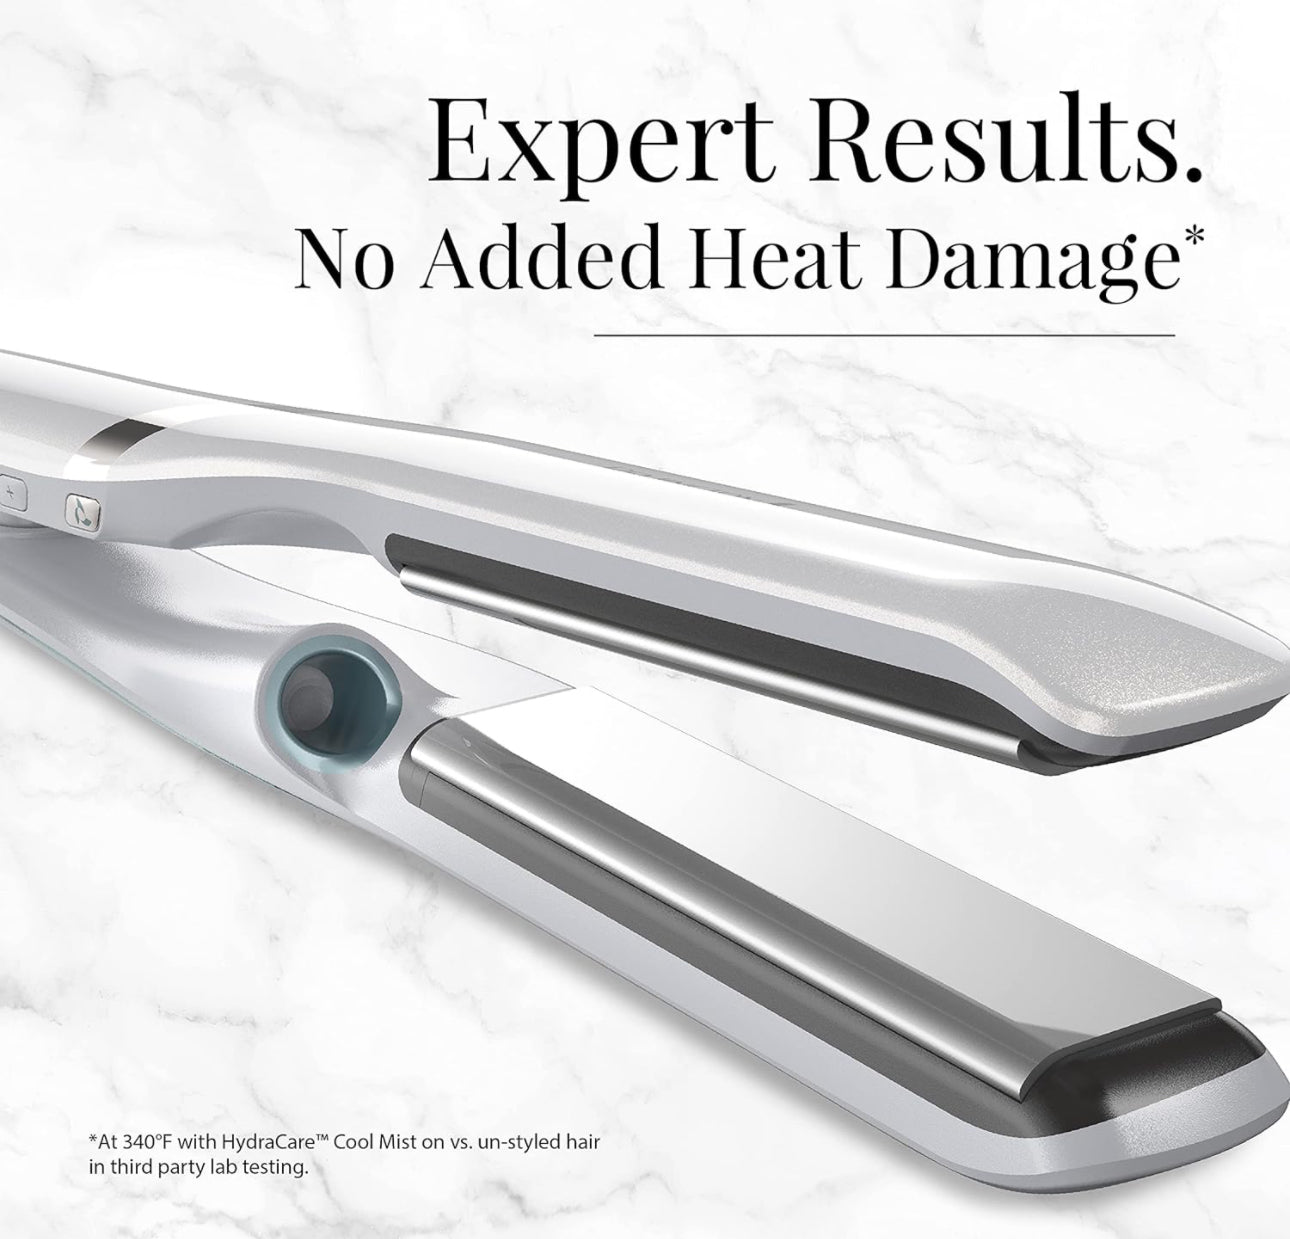 Remington PROLUXE HydraCare 1” Flat Iron / Hair Straightener with 1” Floating Plates, 450°F High Heat, Pearl White/Gray